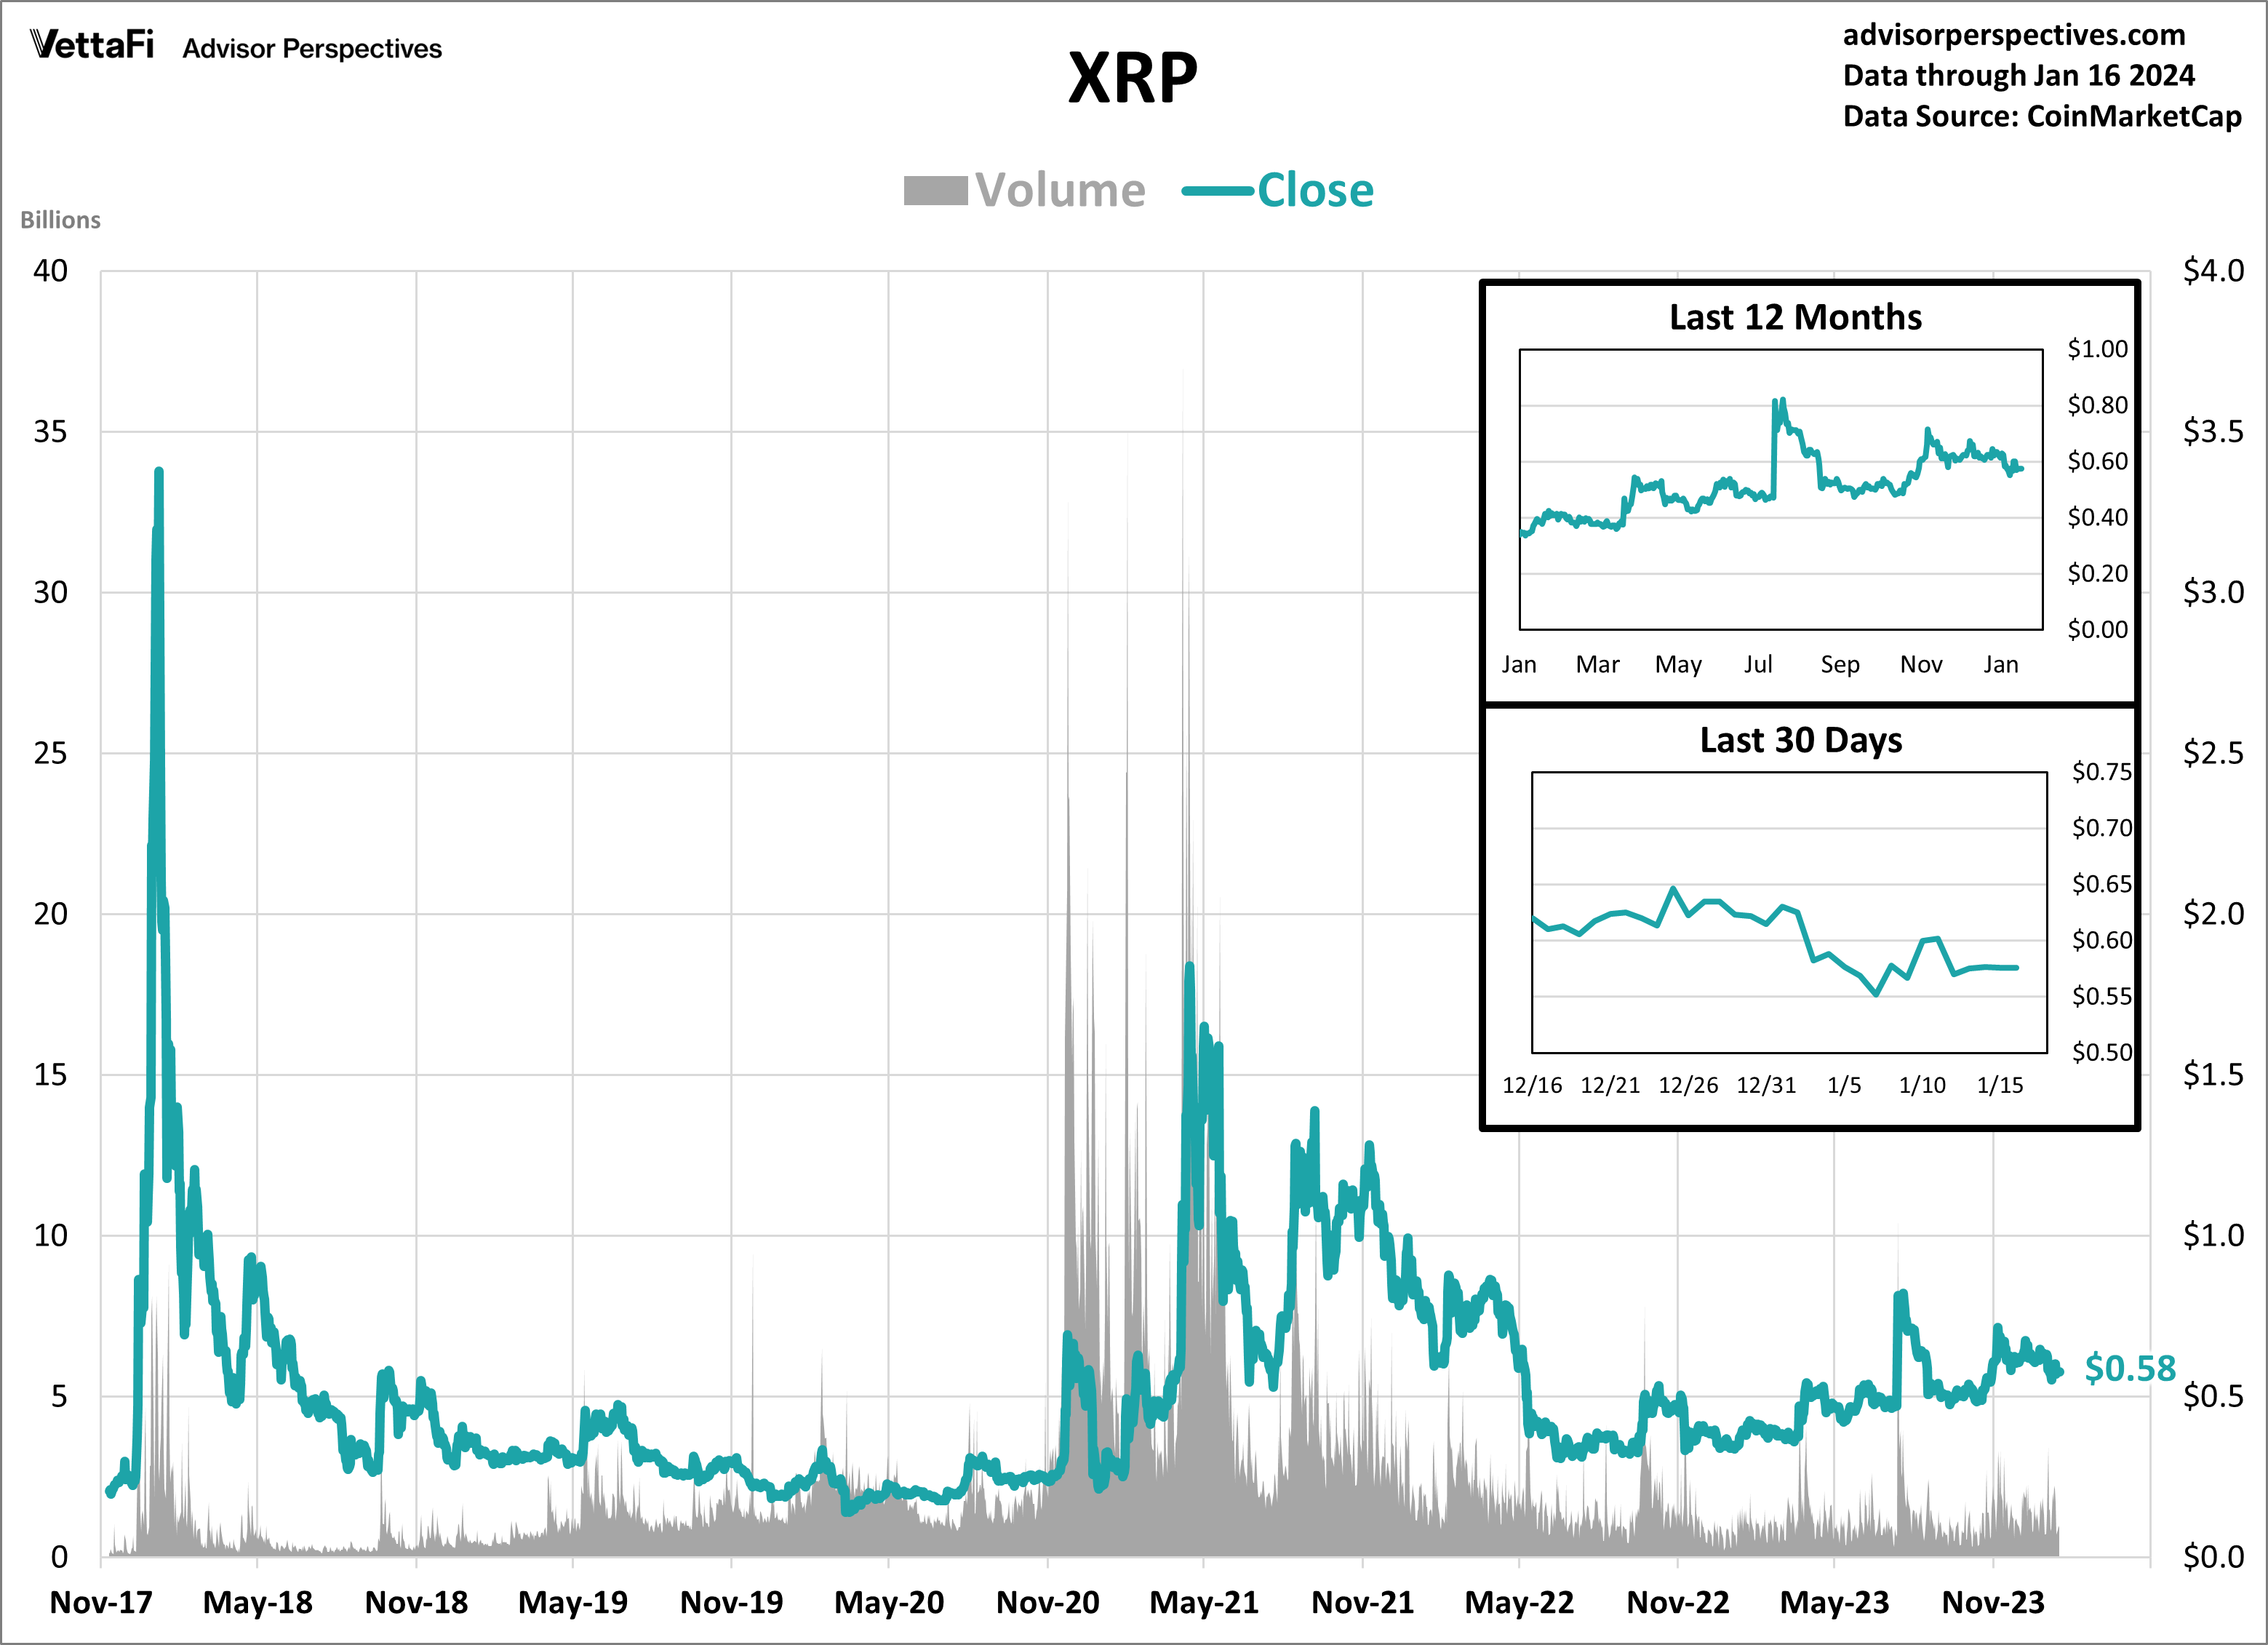 XRP - Volume and Close